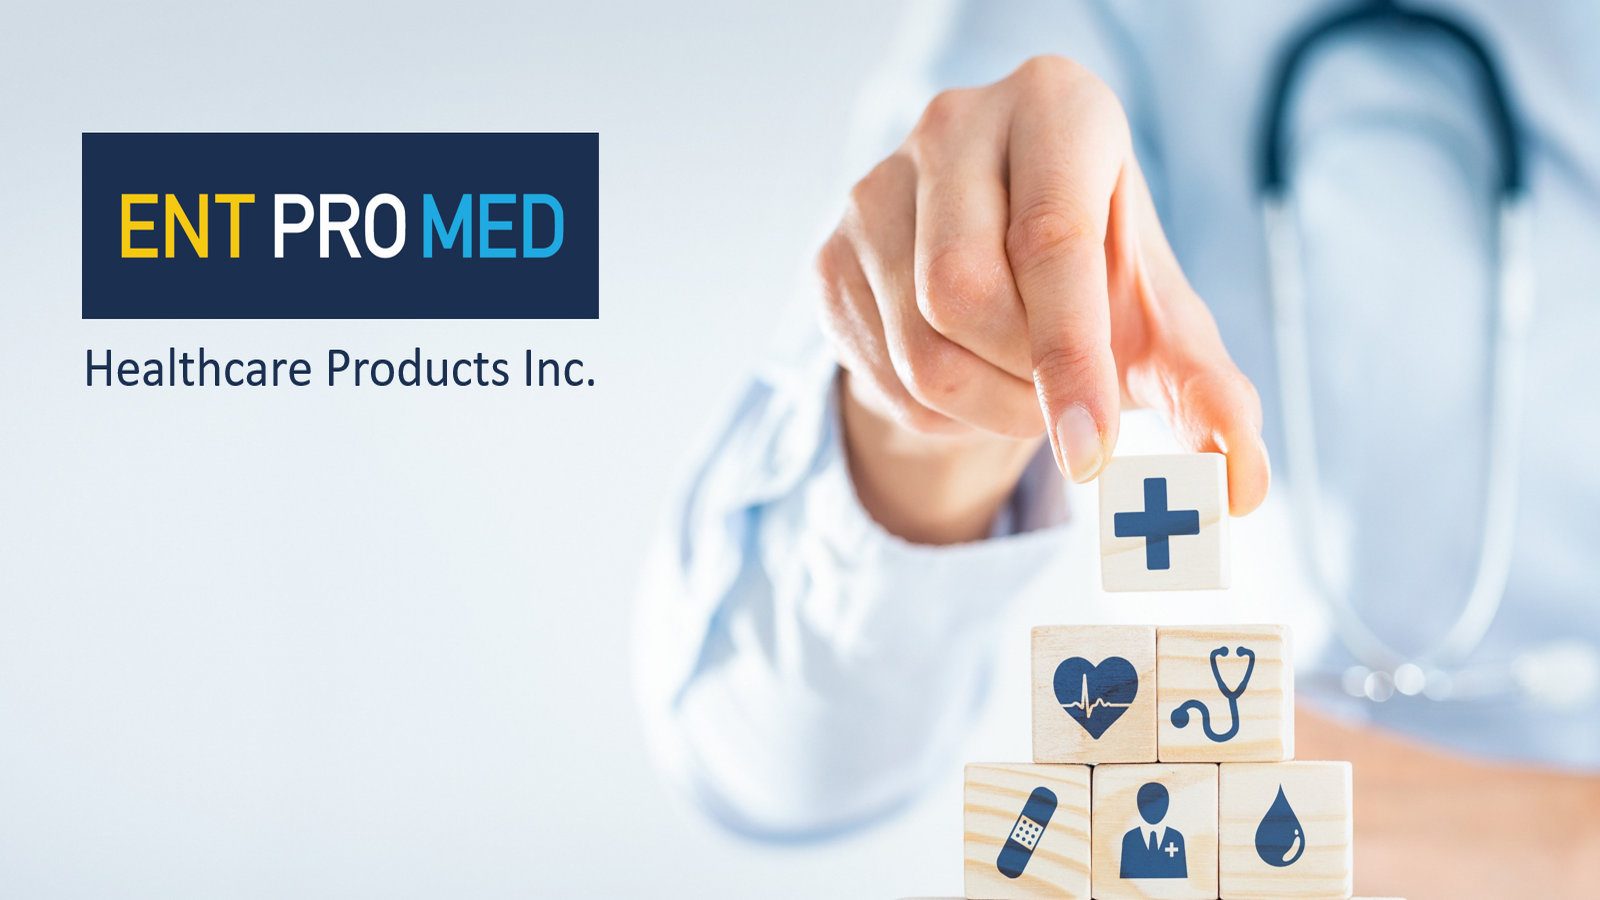 ENTPROMED Healthcare Products Inc